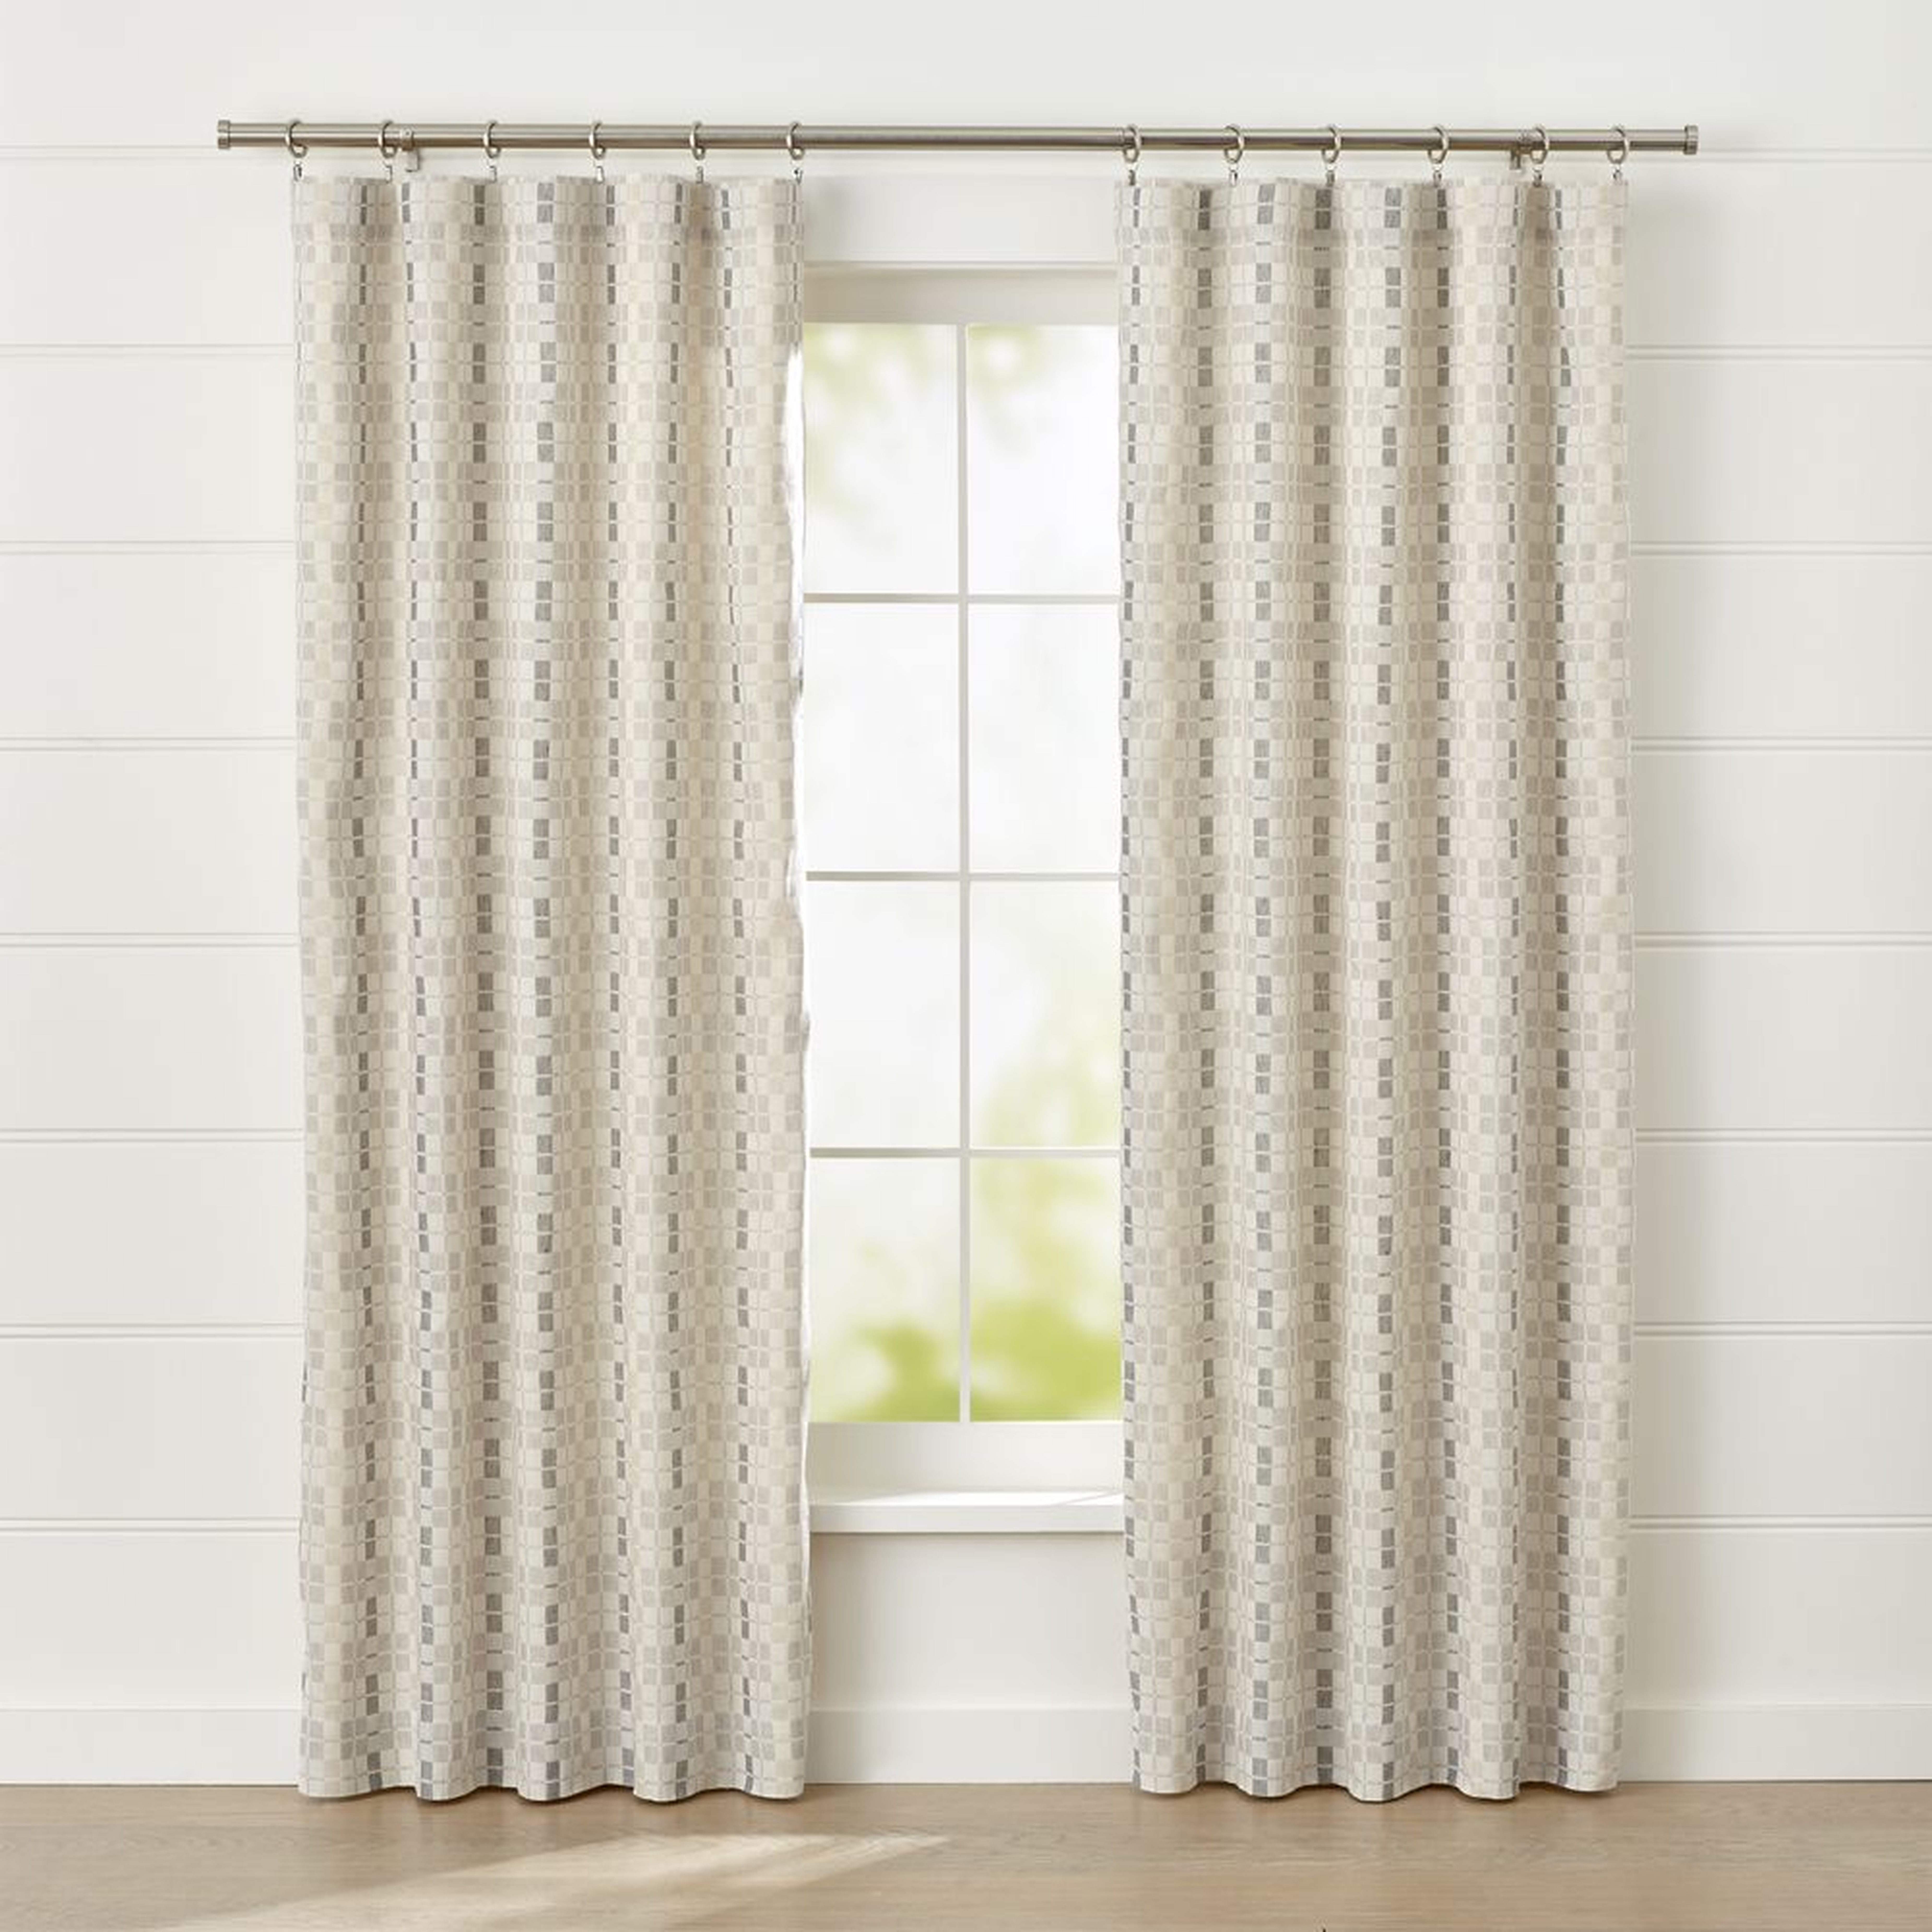 Pastore Neutral Curtain Panel 50"x84" - Crate and Barrel